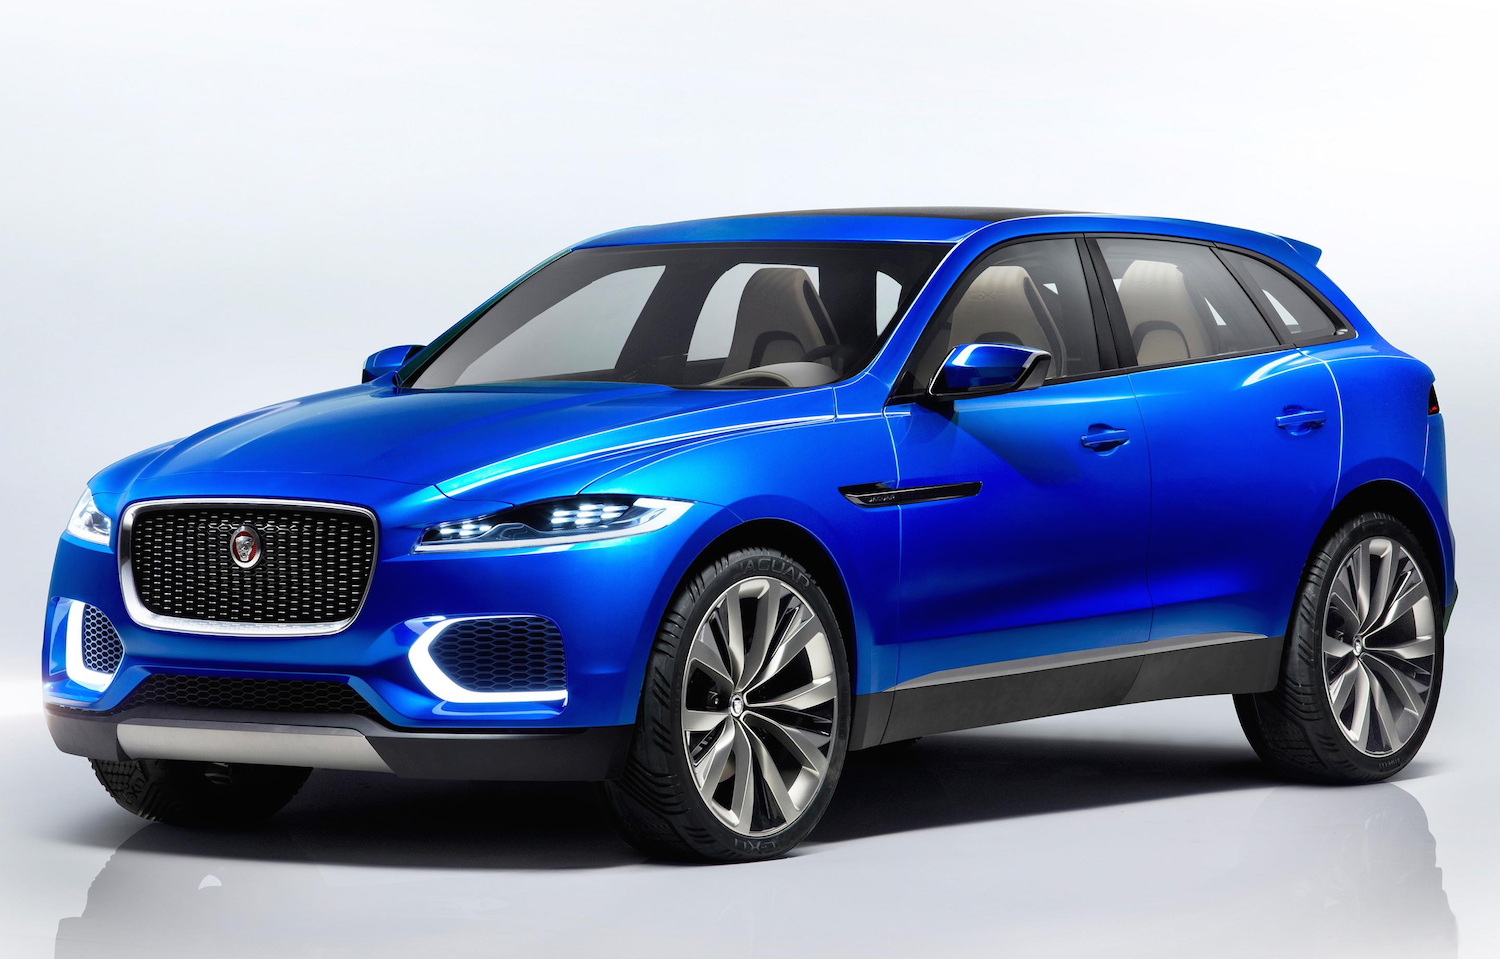 2016 Jaguar F-Pace SUV, The First Sport Utility Vehicle ...